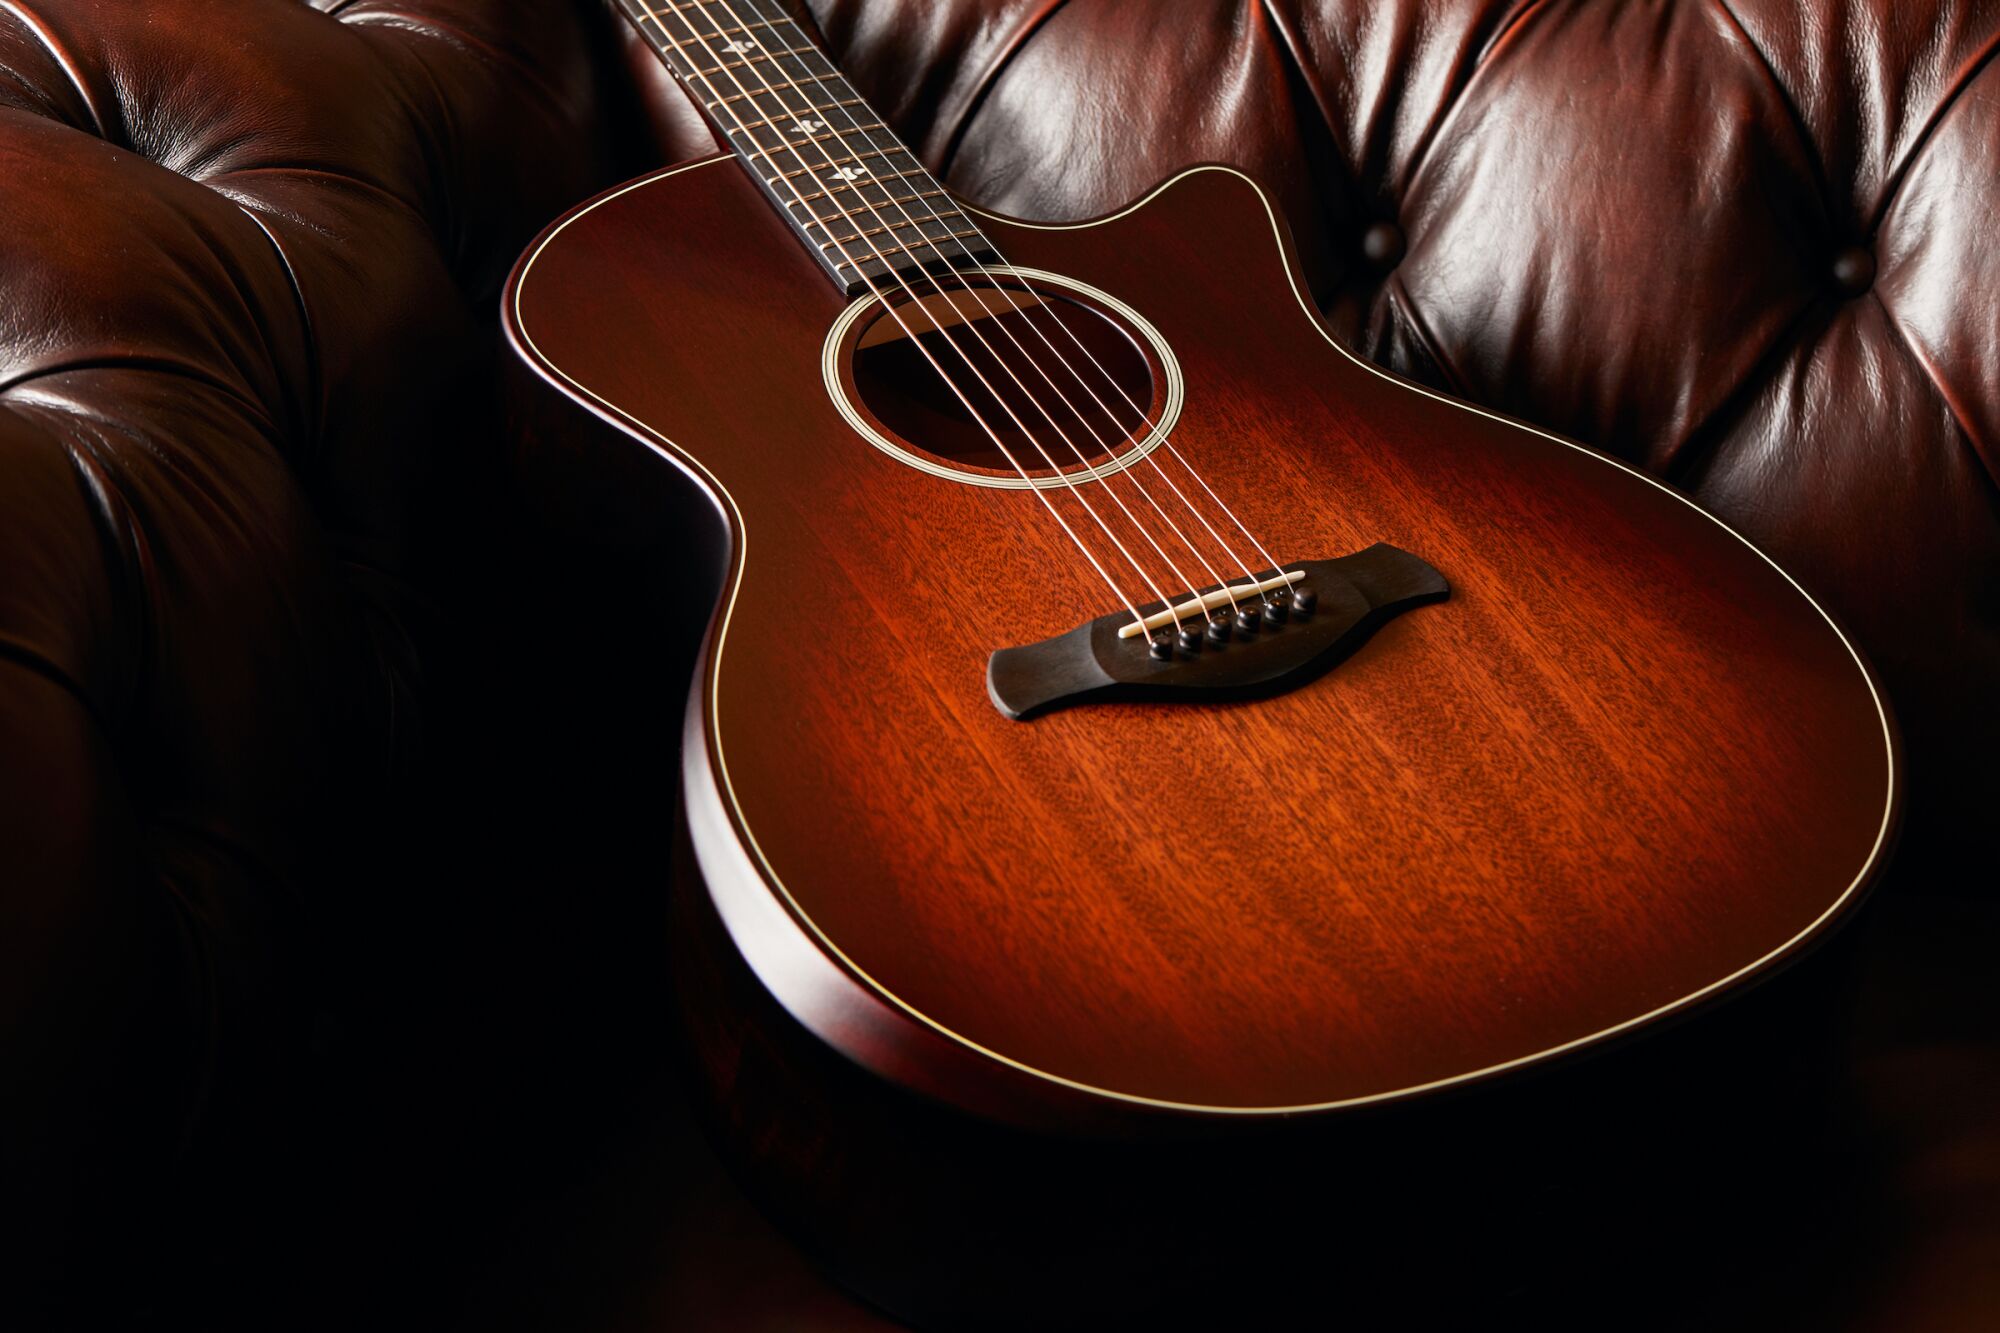 Taylor Guitars' high-end guitar made out of urban wood.